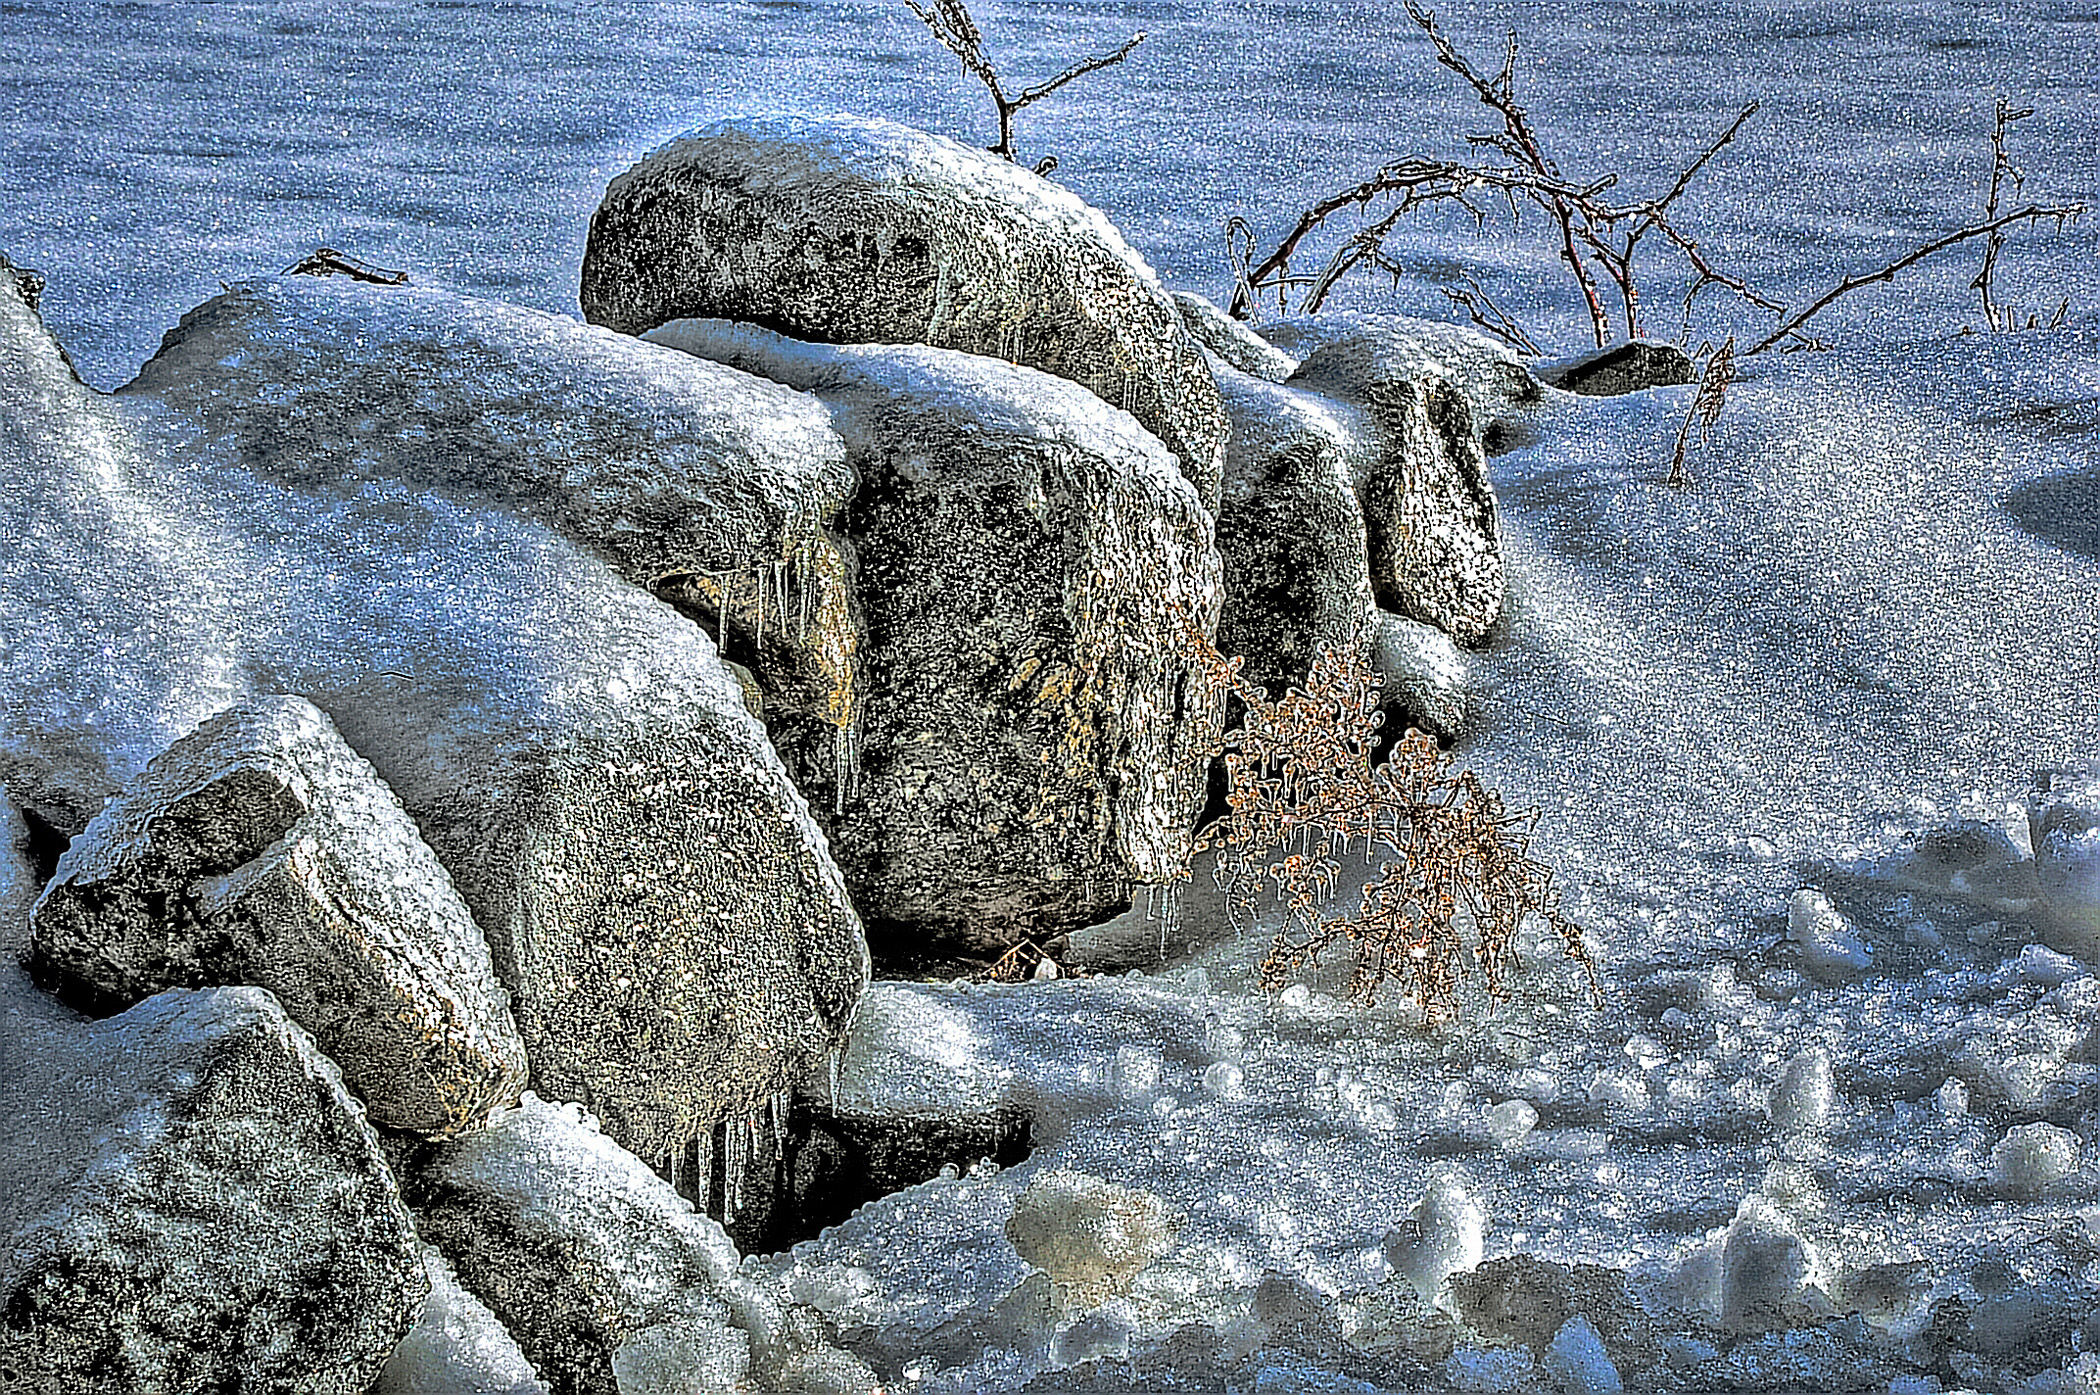 Stones After Ice Storm (user submitted)